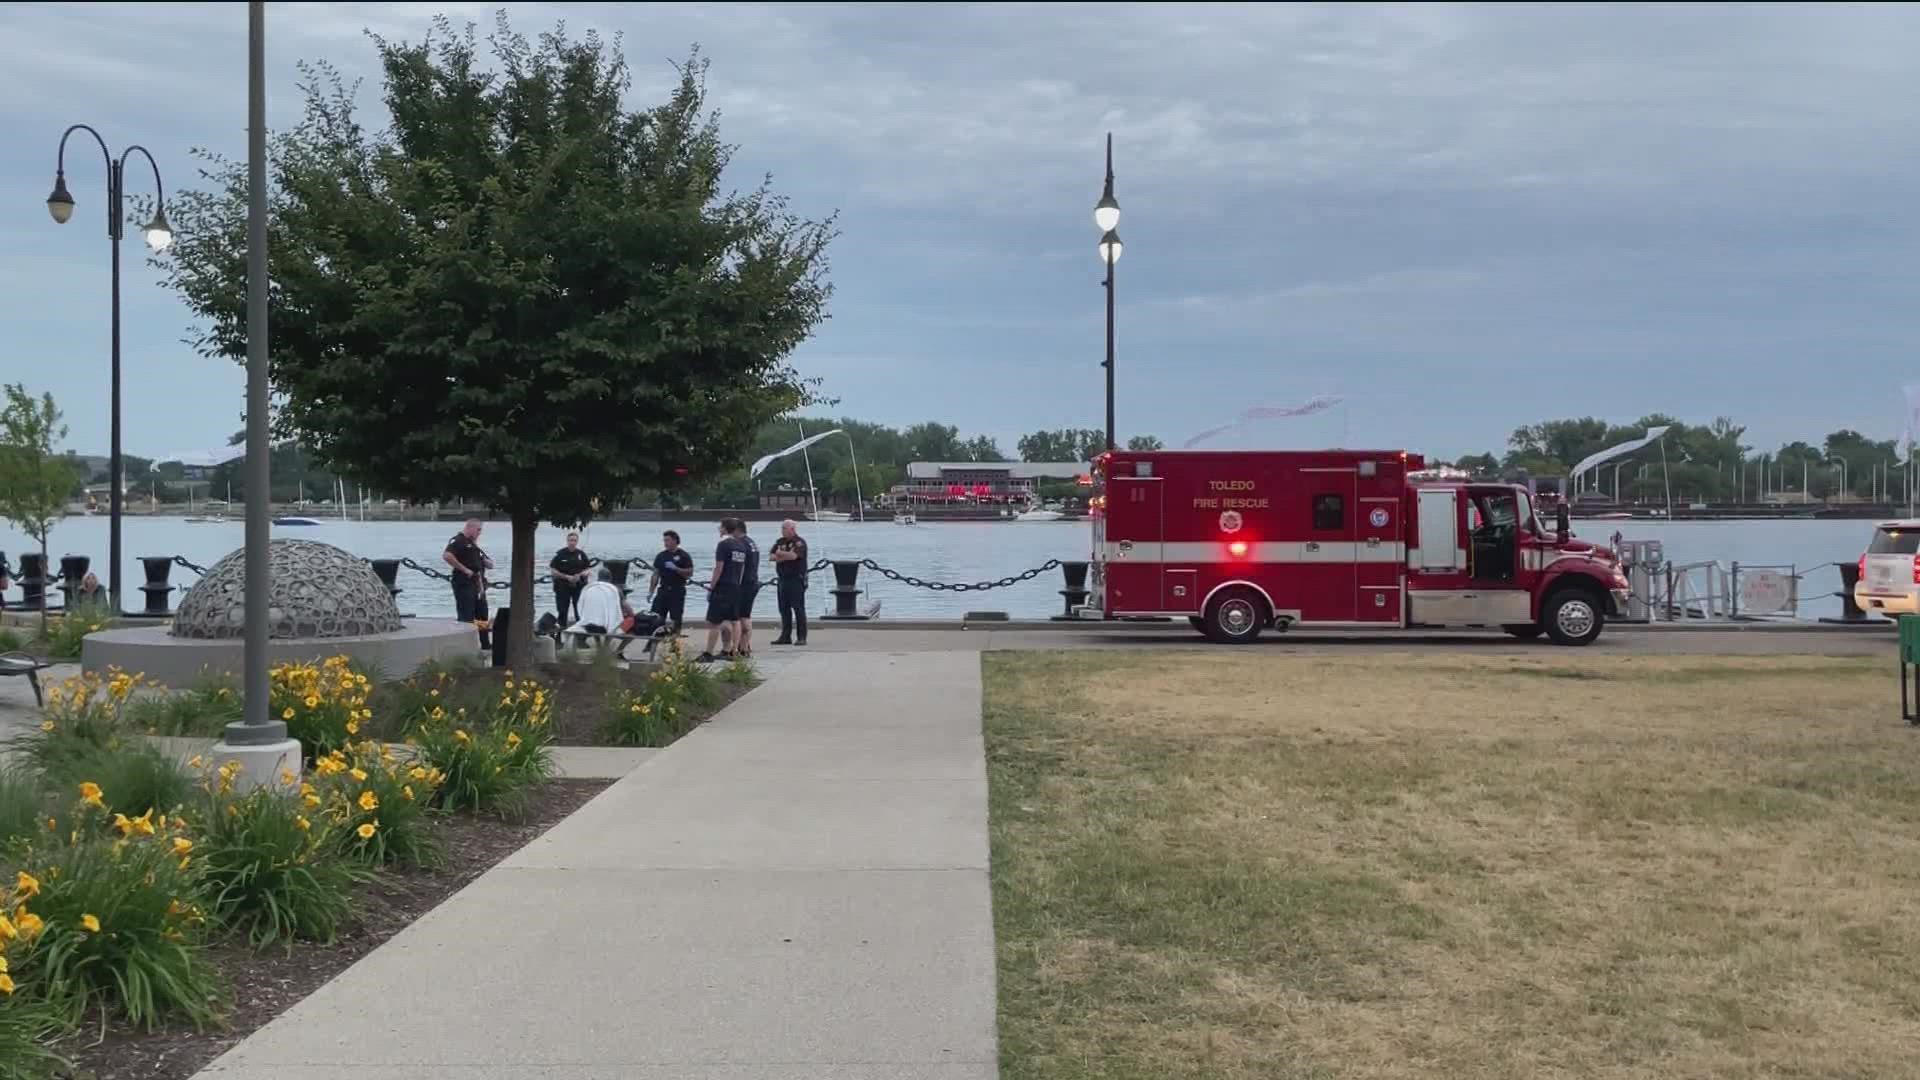 Three teens on bicycles jumped the man and stole his bike before pushing him into the river, police said. A witness called 911 while boaters came to the man's aid.